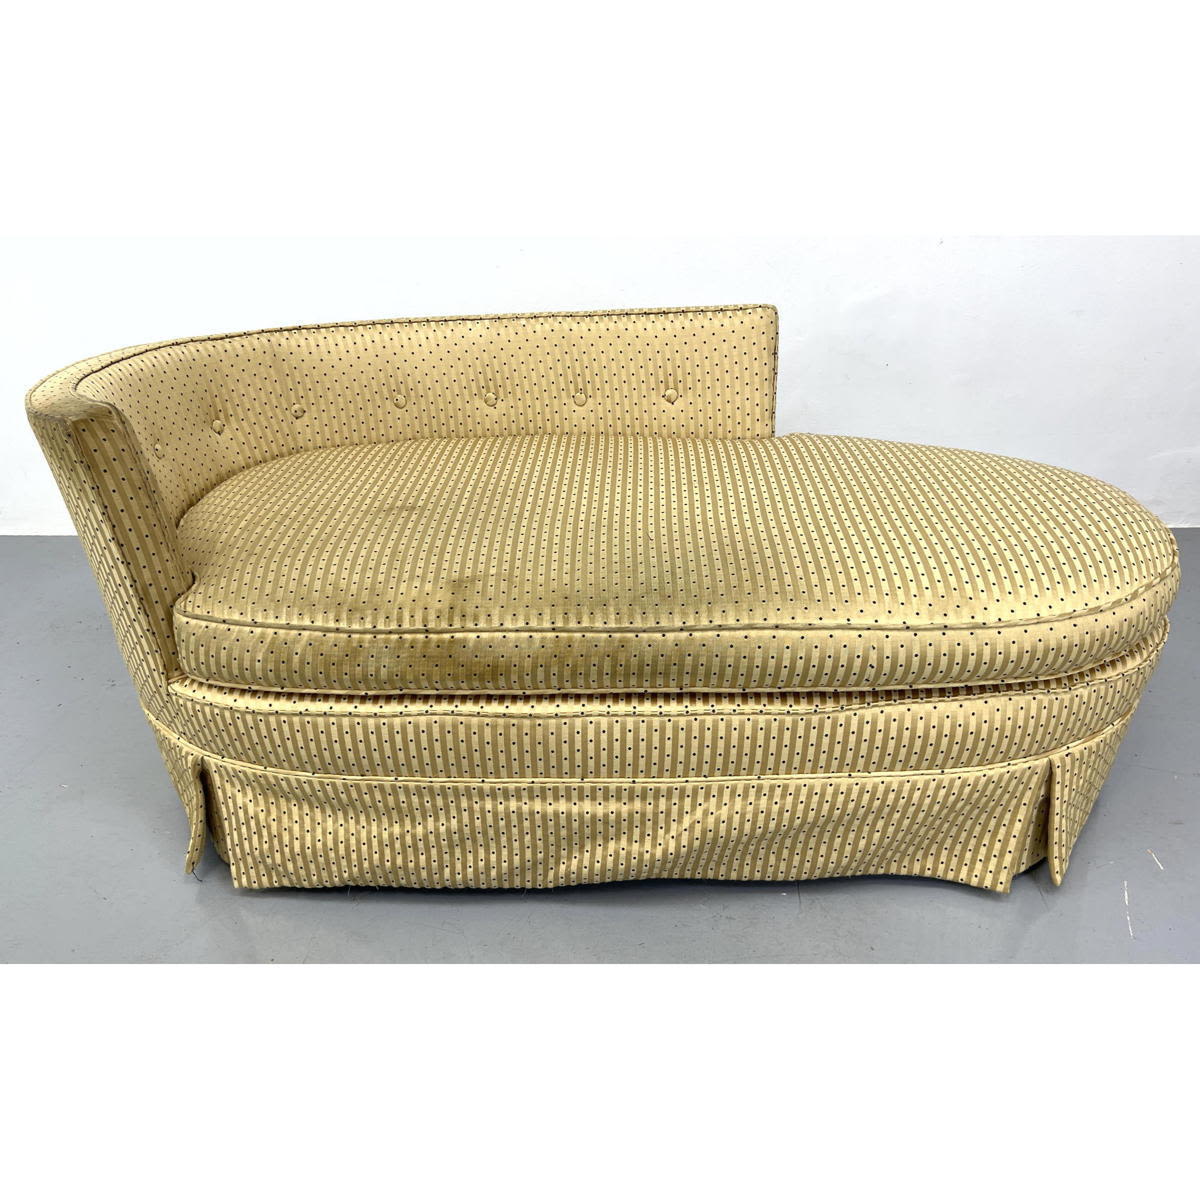 Fully upholstered Fainting couch 2a7845